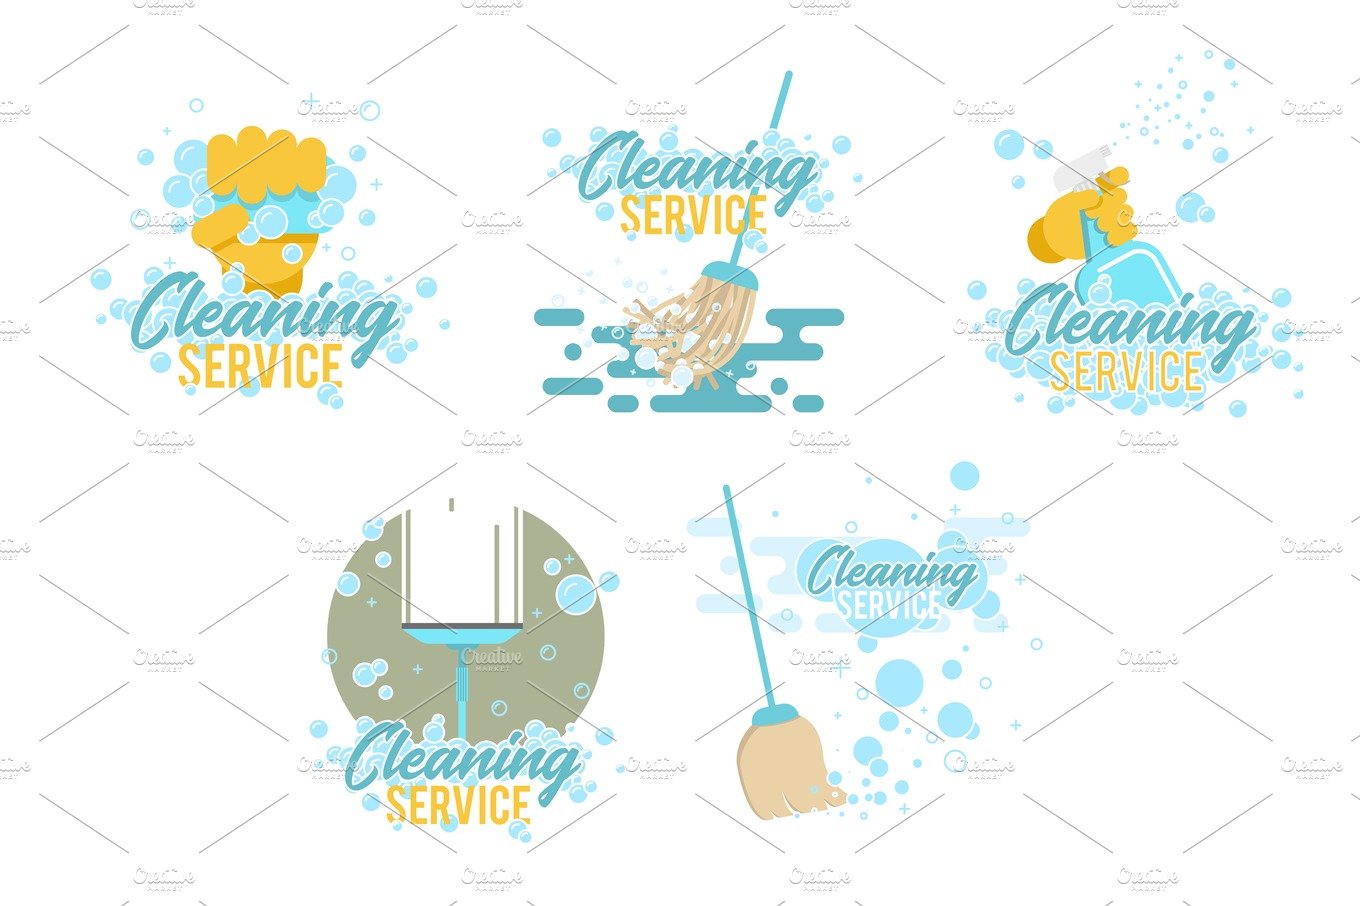 Cleaning service logos and symbols templates cover image.